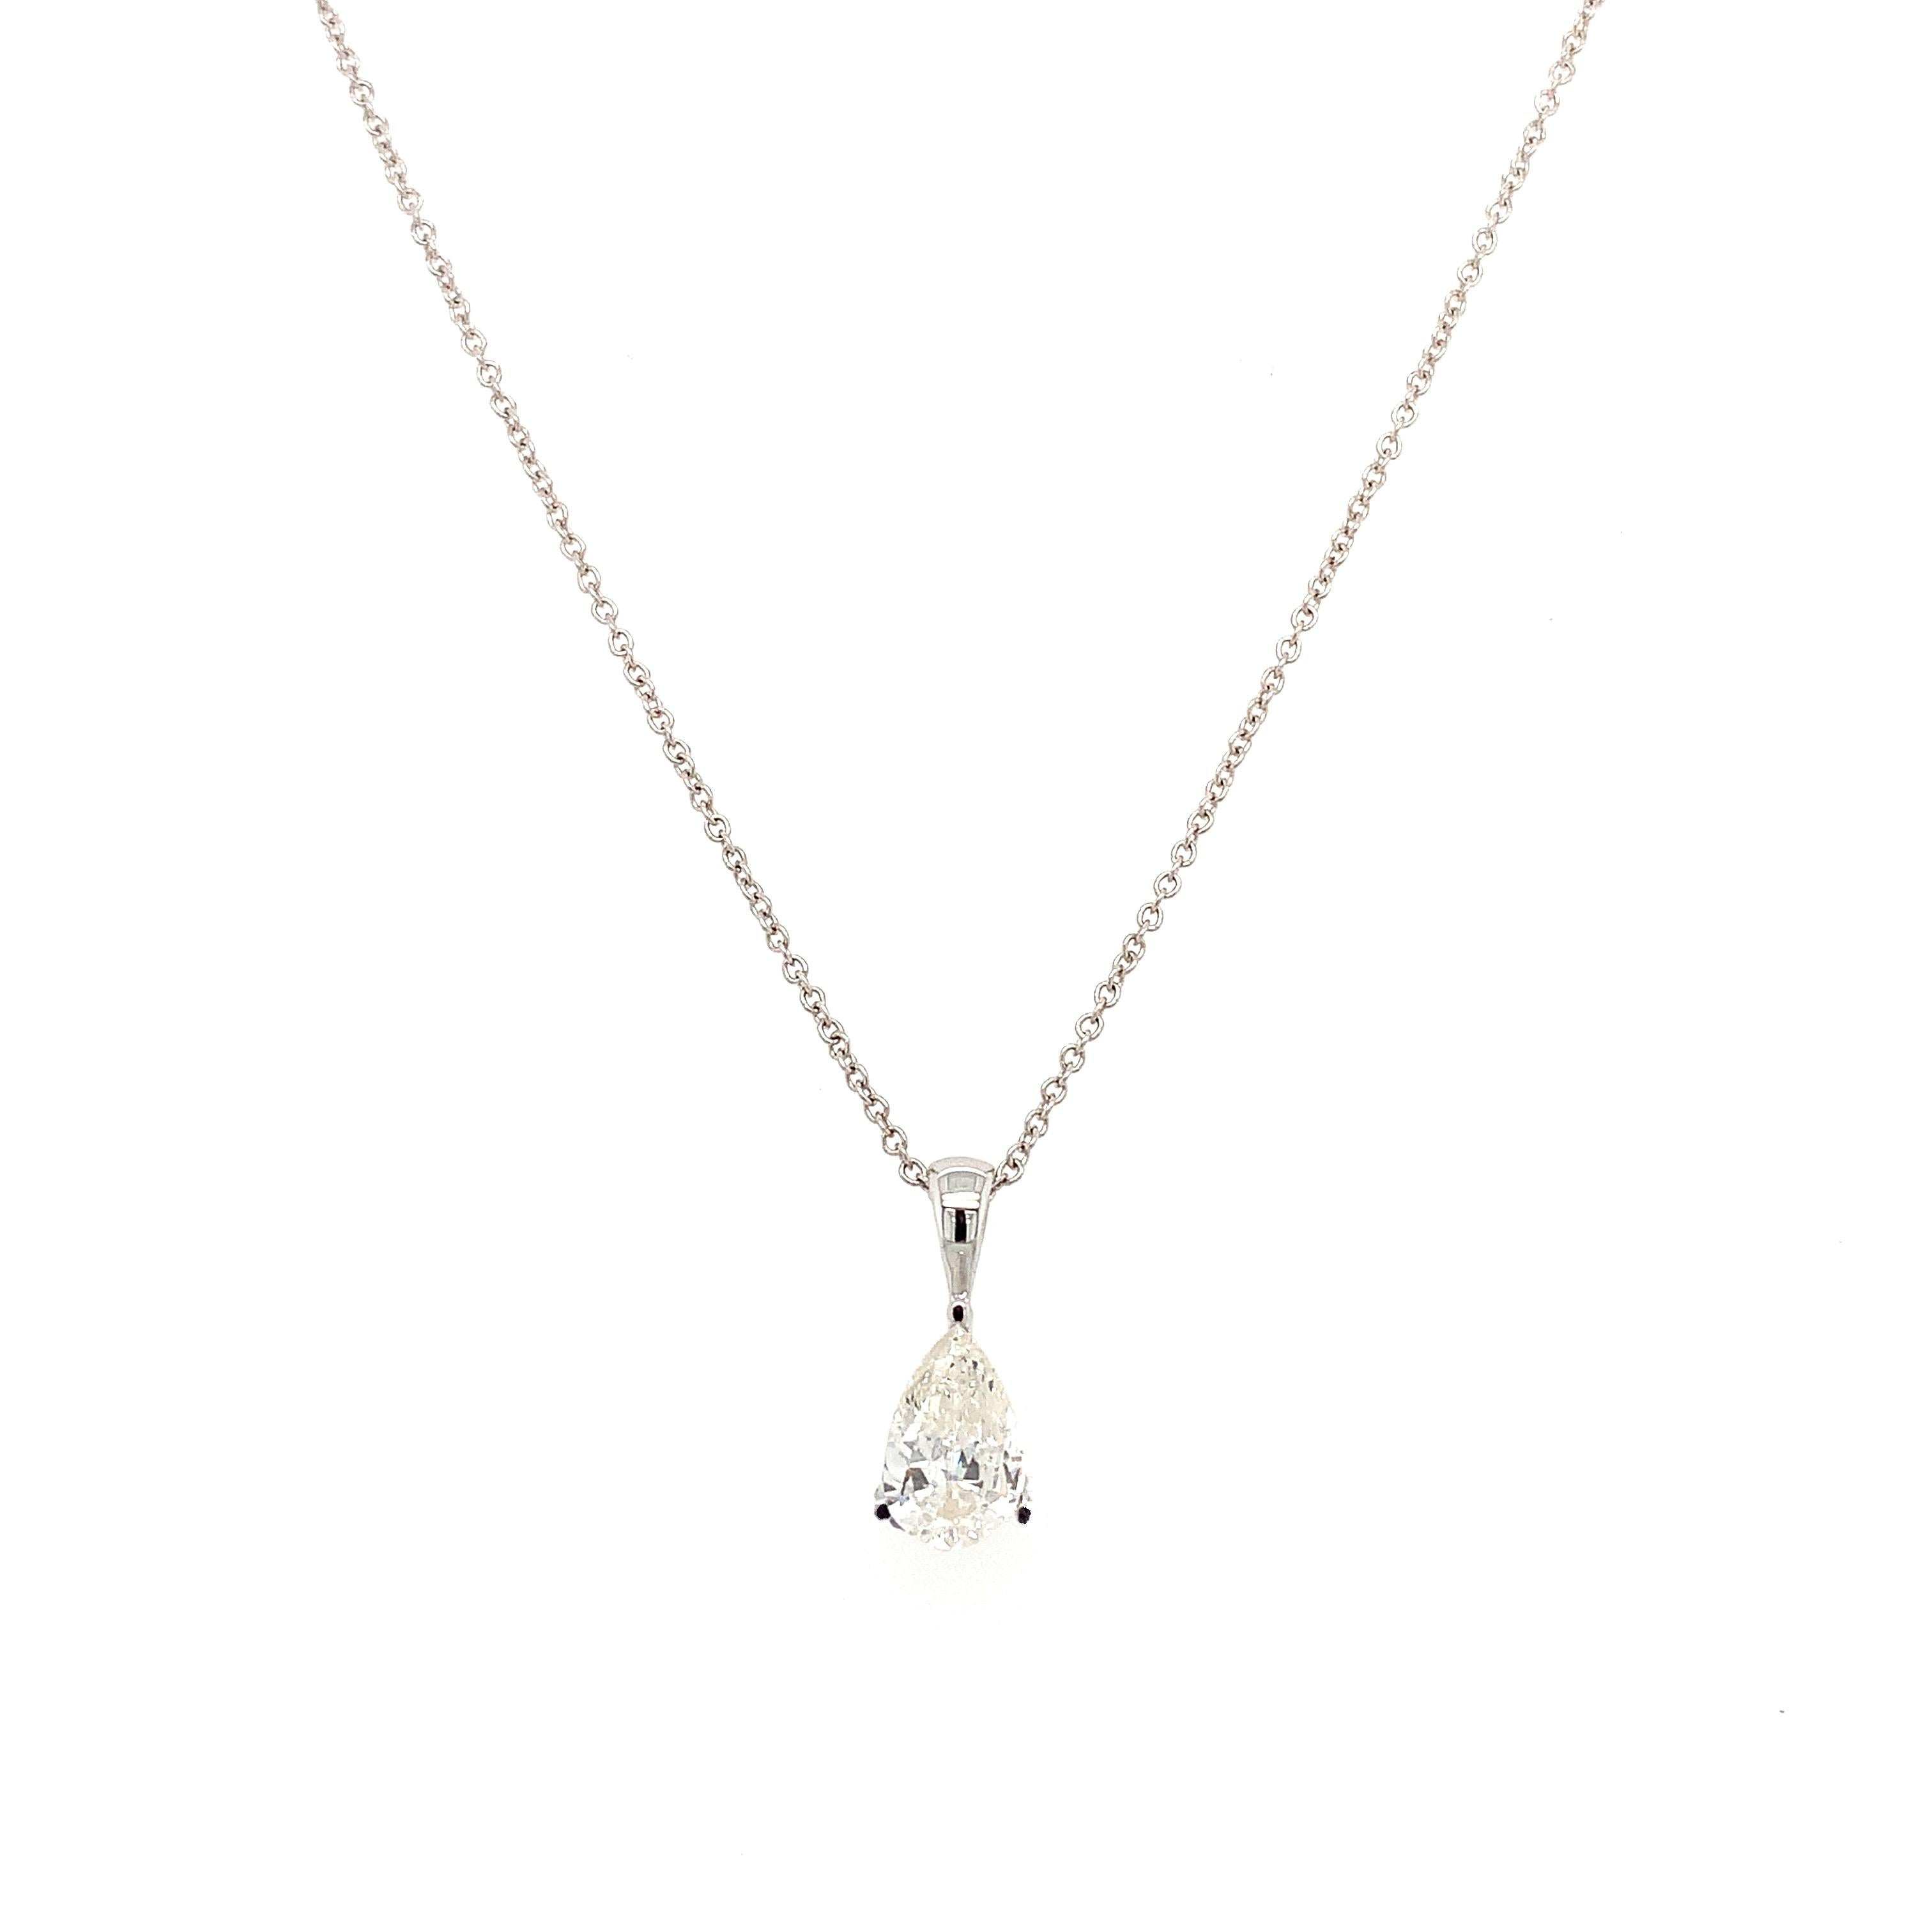 Pear shaped diamond solitaire drop pendant necklace 18k white gold  In New Condition For Sale In London, GB